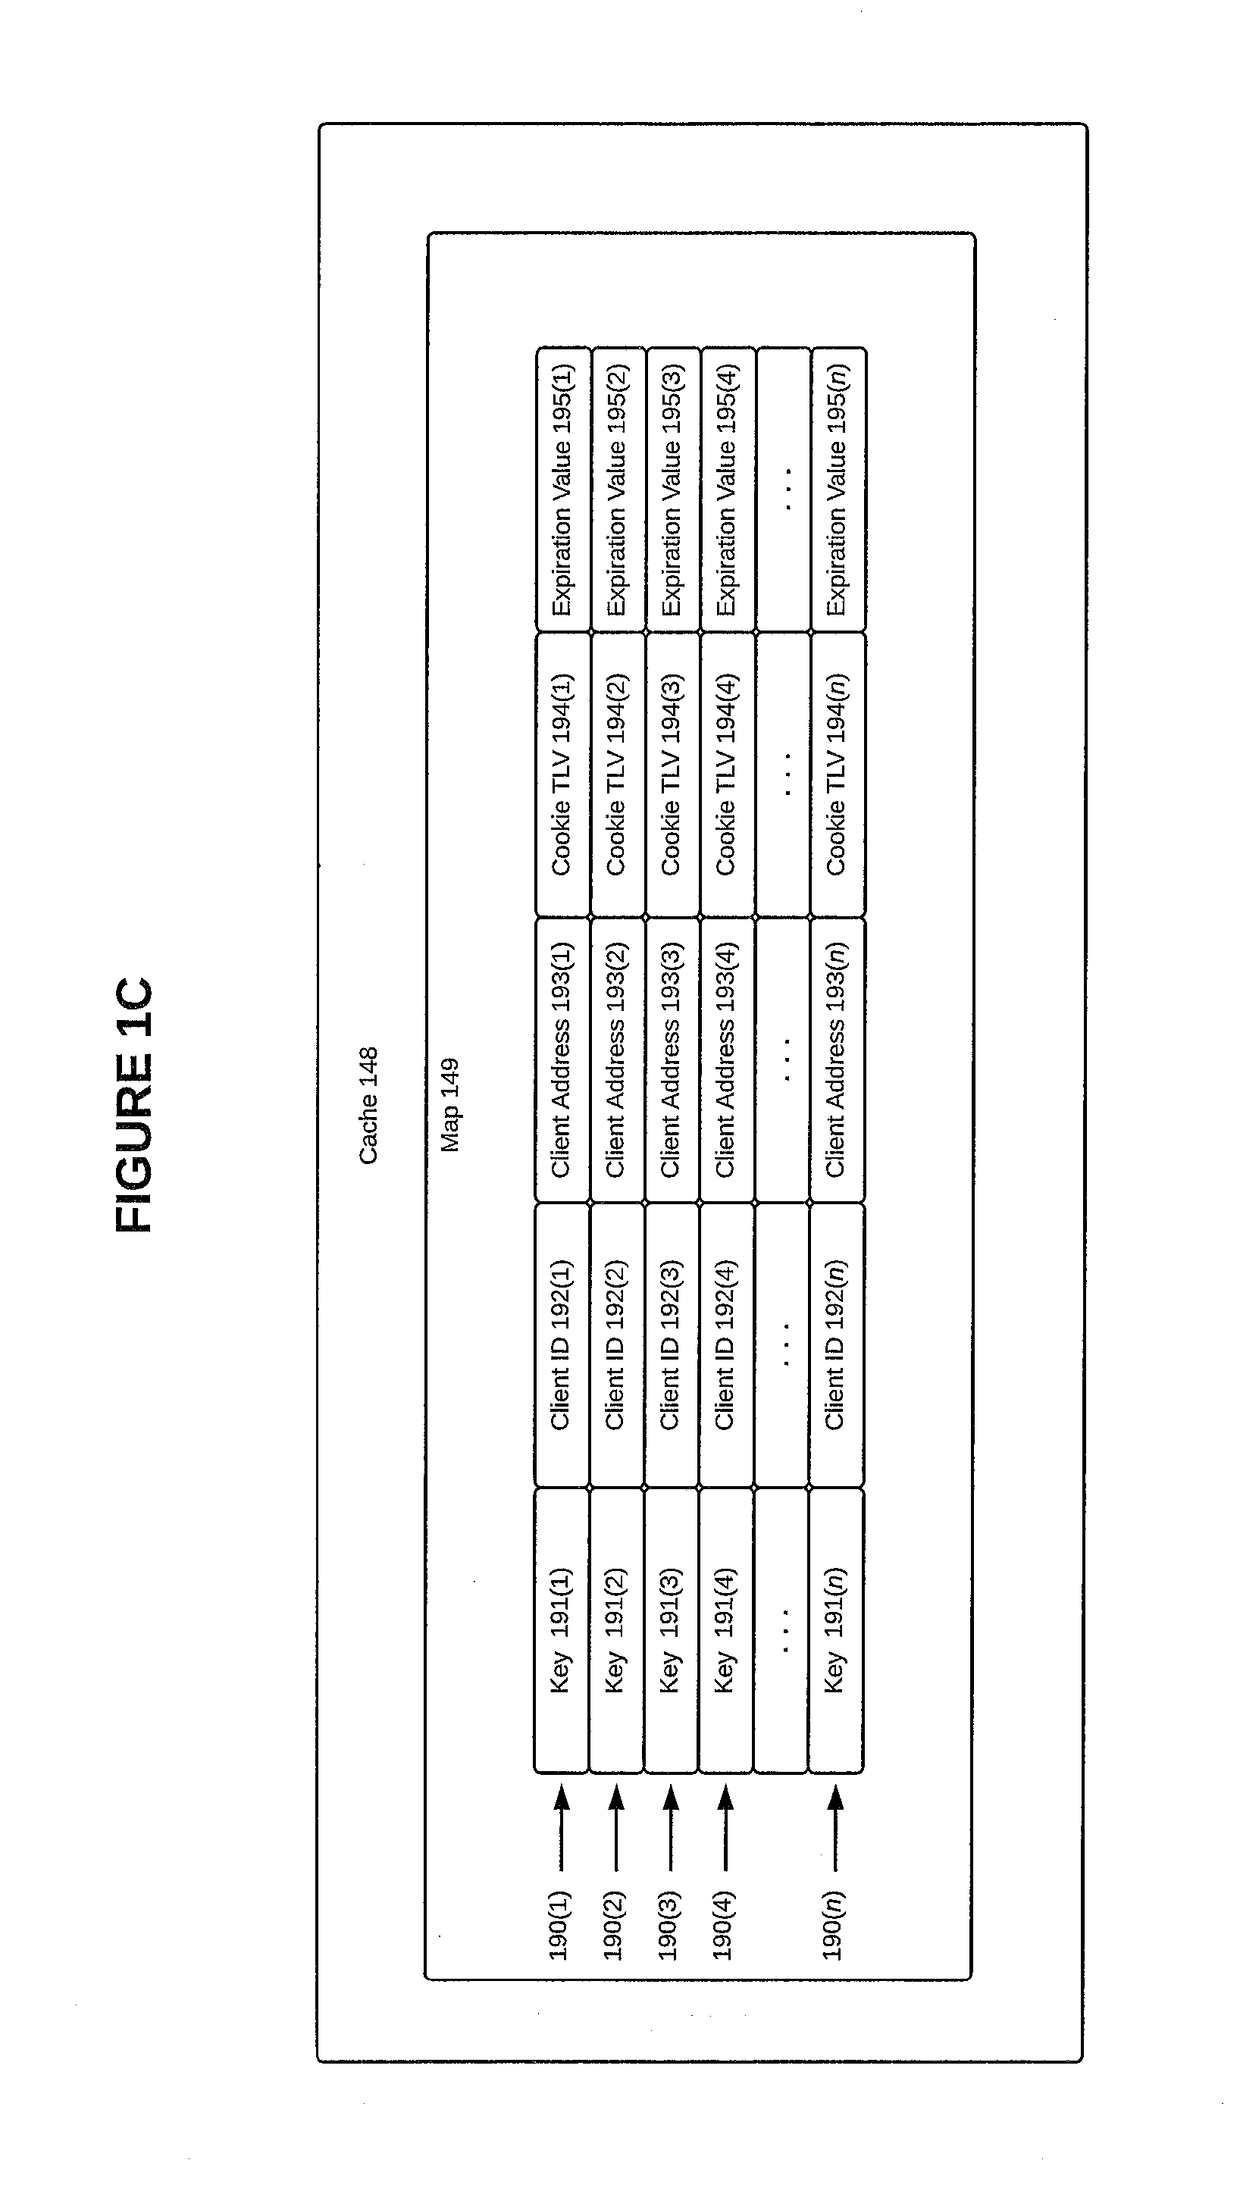 Network service header used to relay authenticated session information